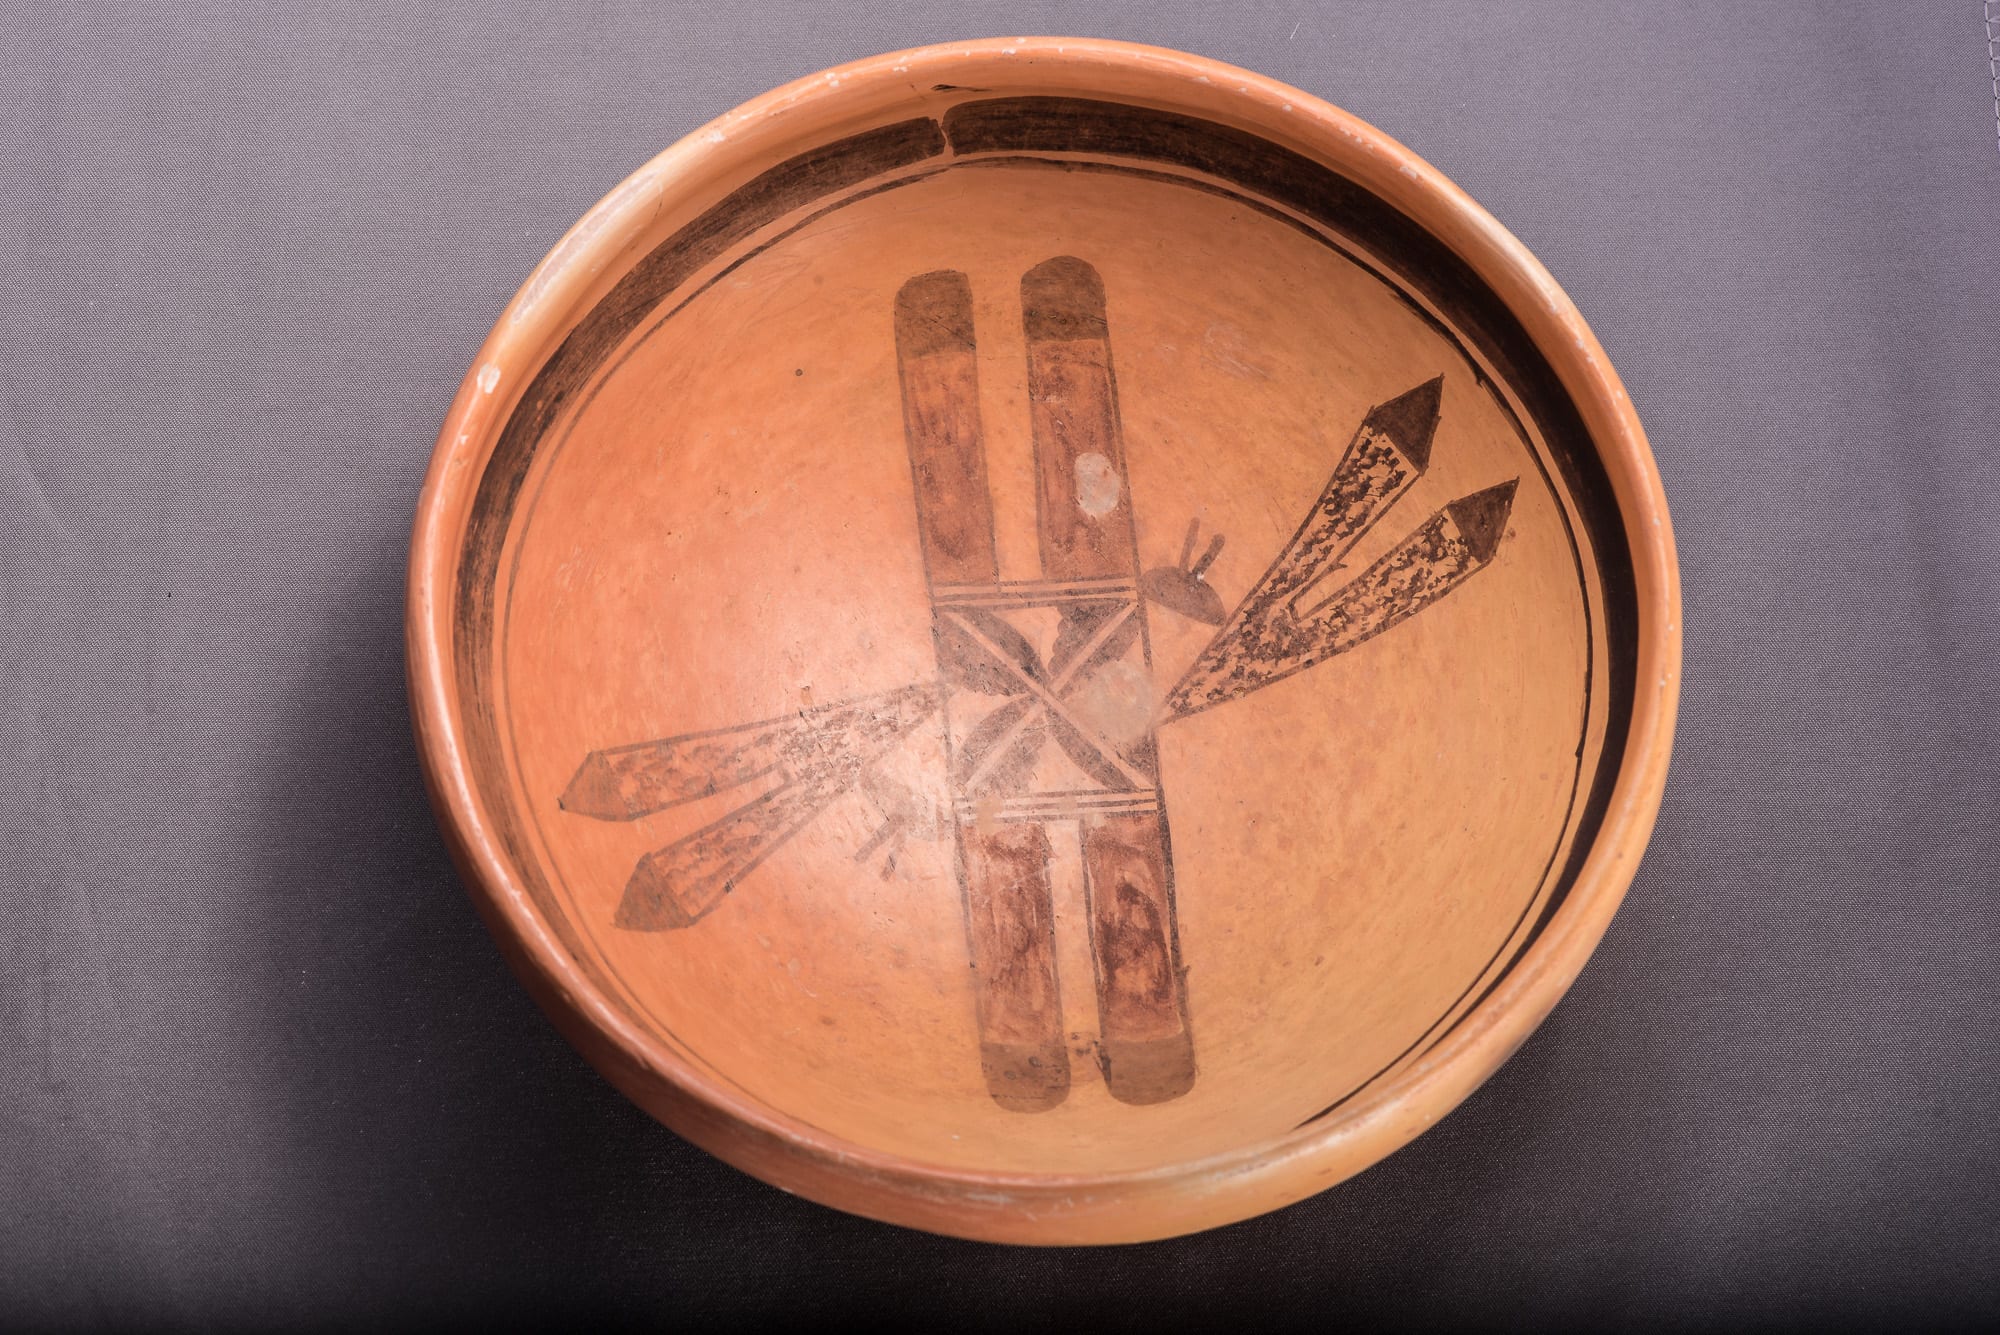 2014-20 Bowl with crossed feather design